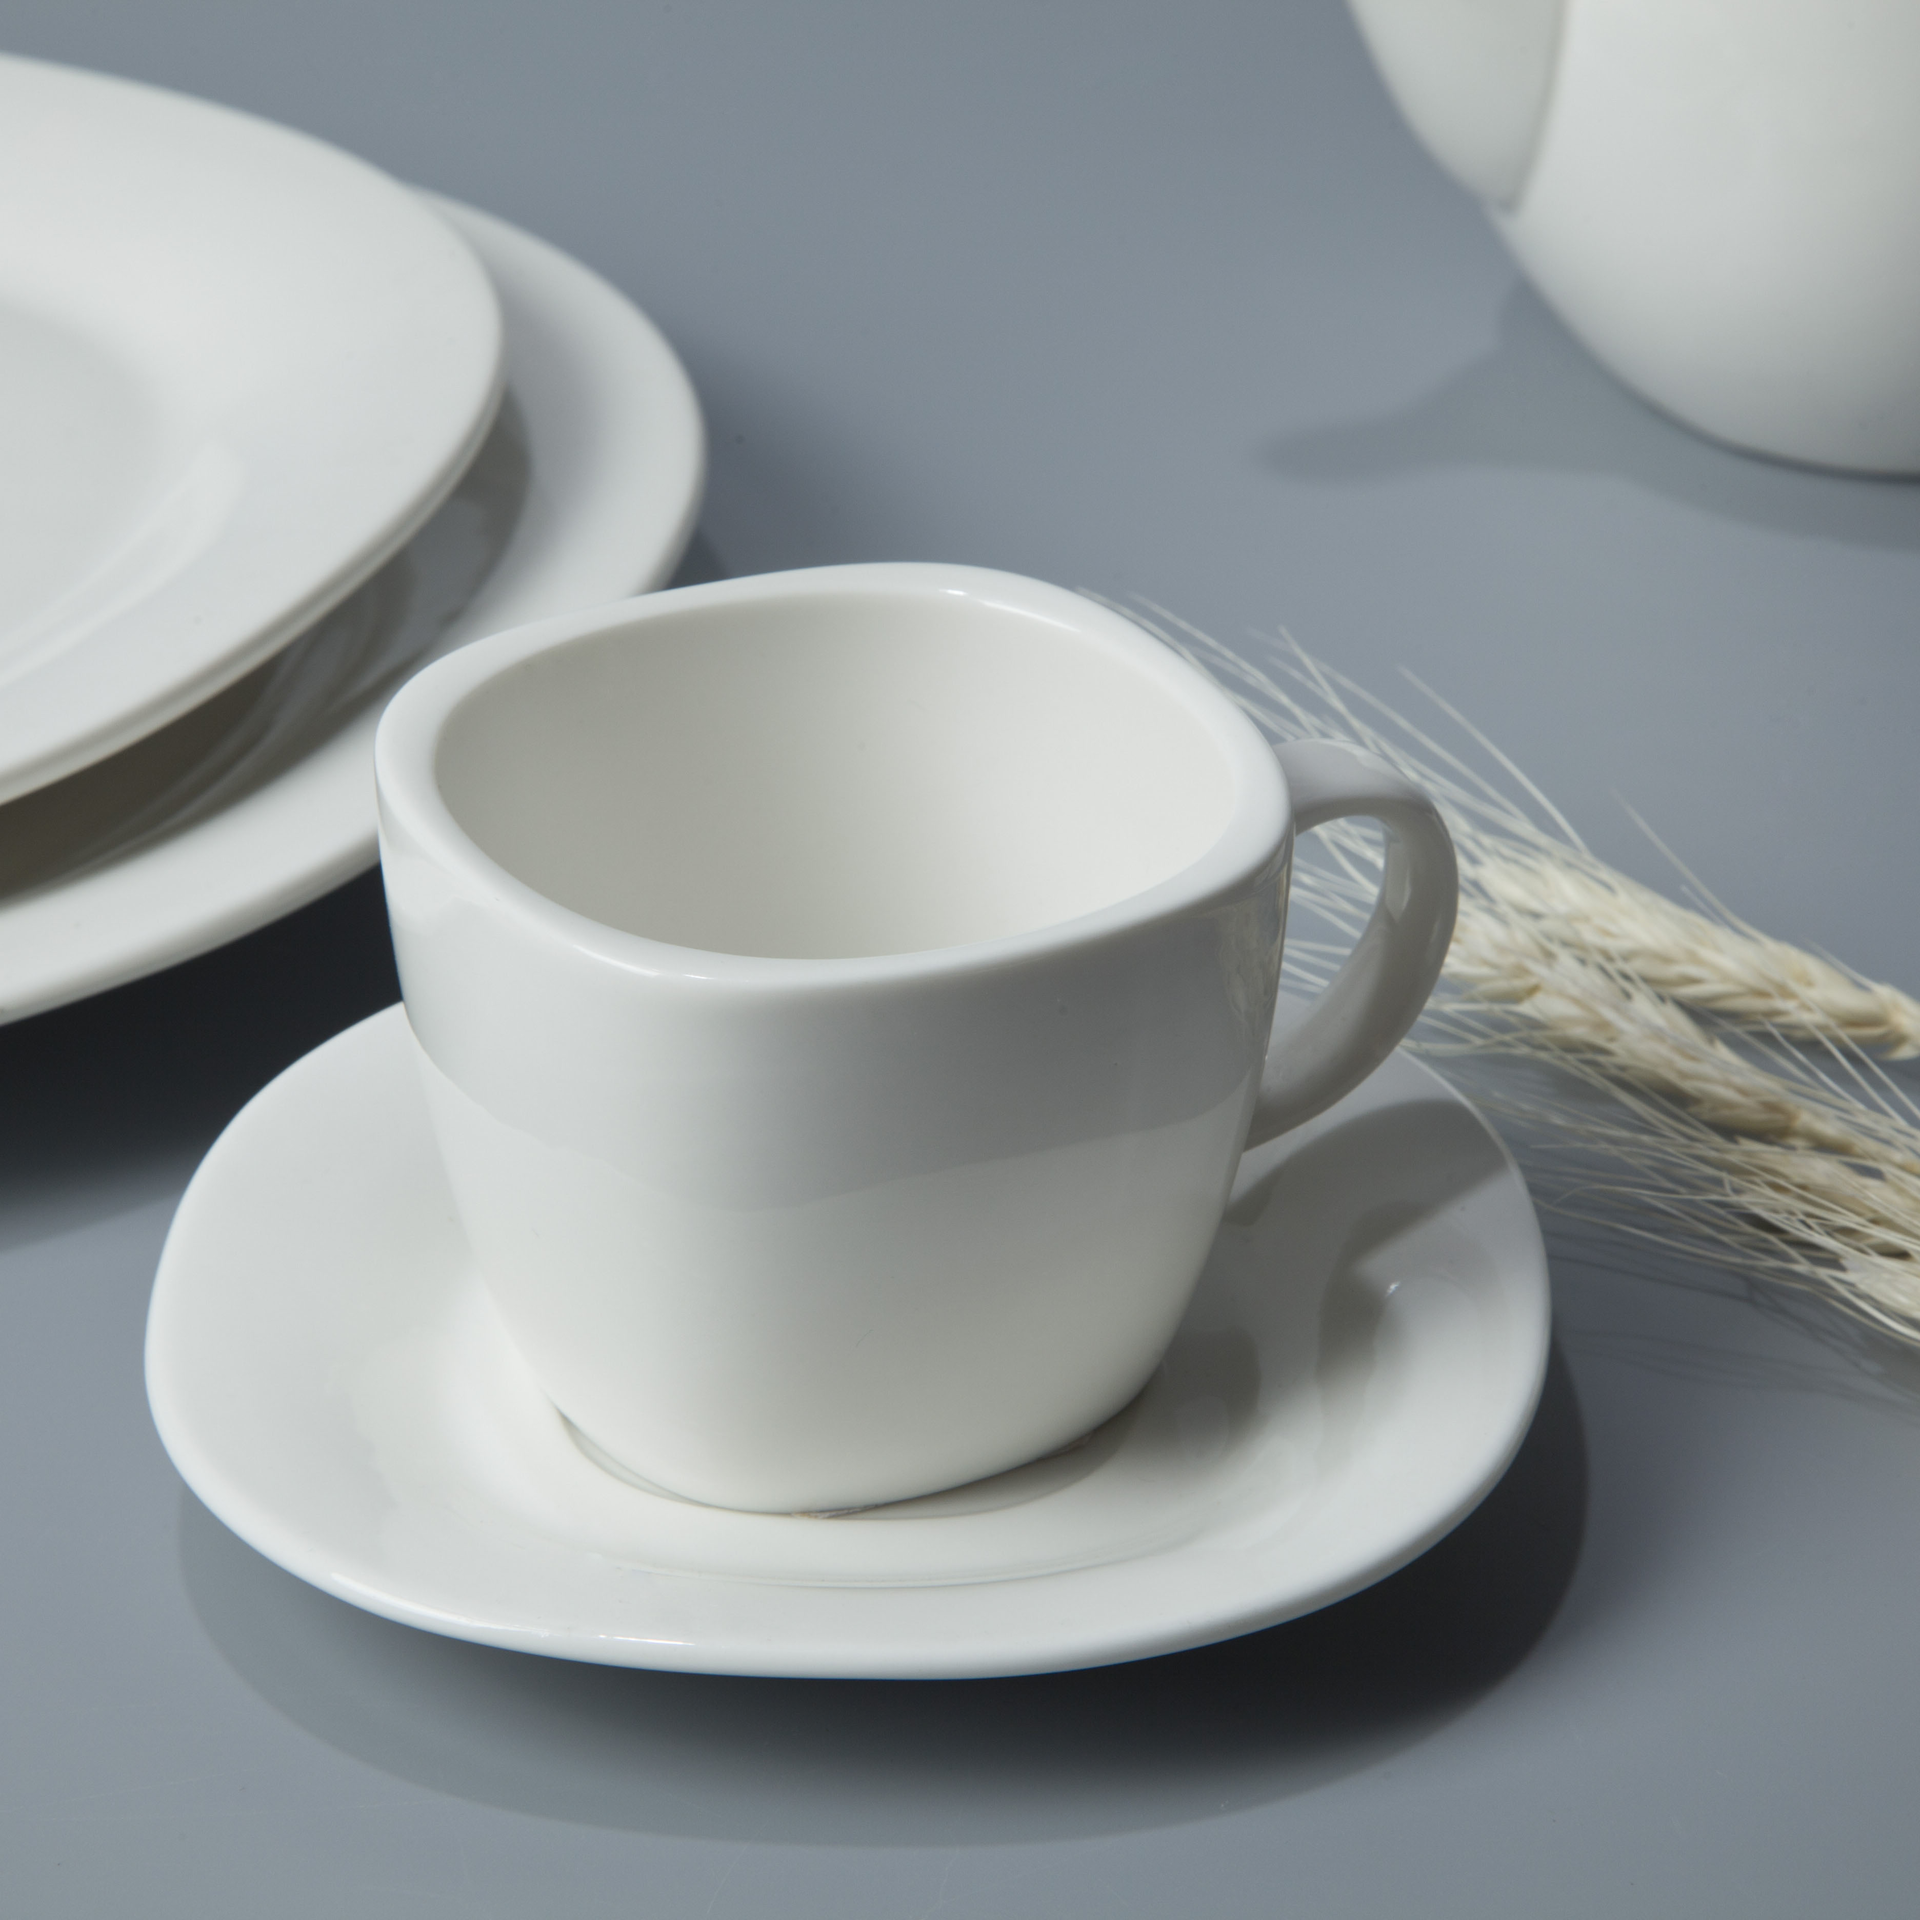 New Product Ideas 2019 Best Selling Products, Luxury RestaurantWedding Table Ware Porcelain Dinnerware/